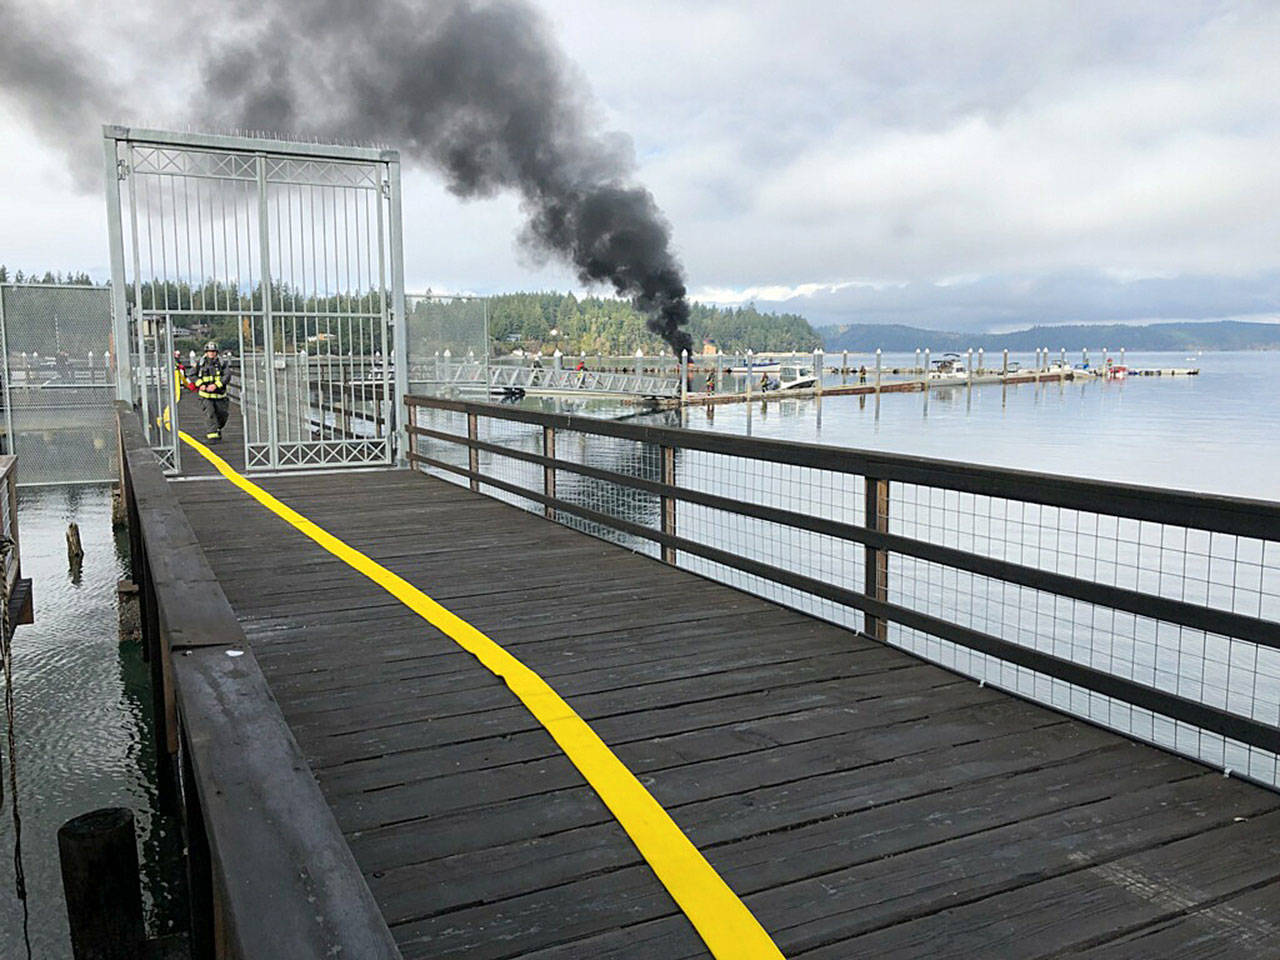 Boat fire injures one in Seabeck